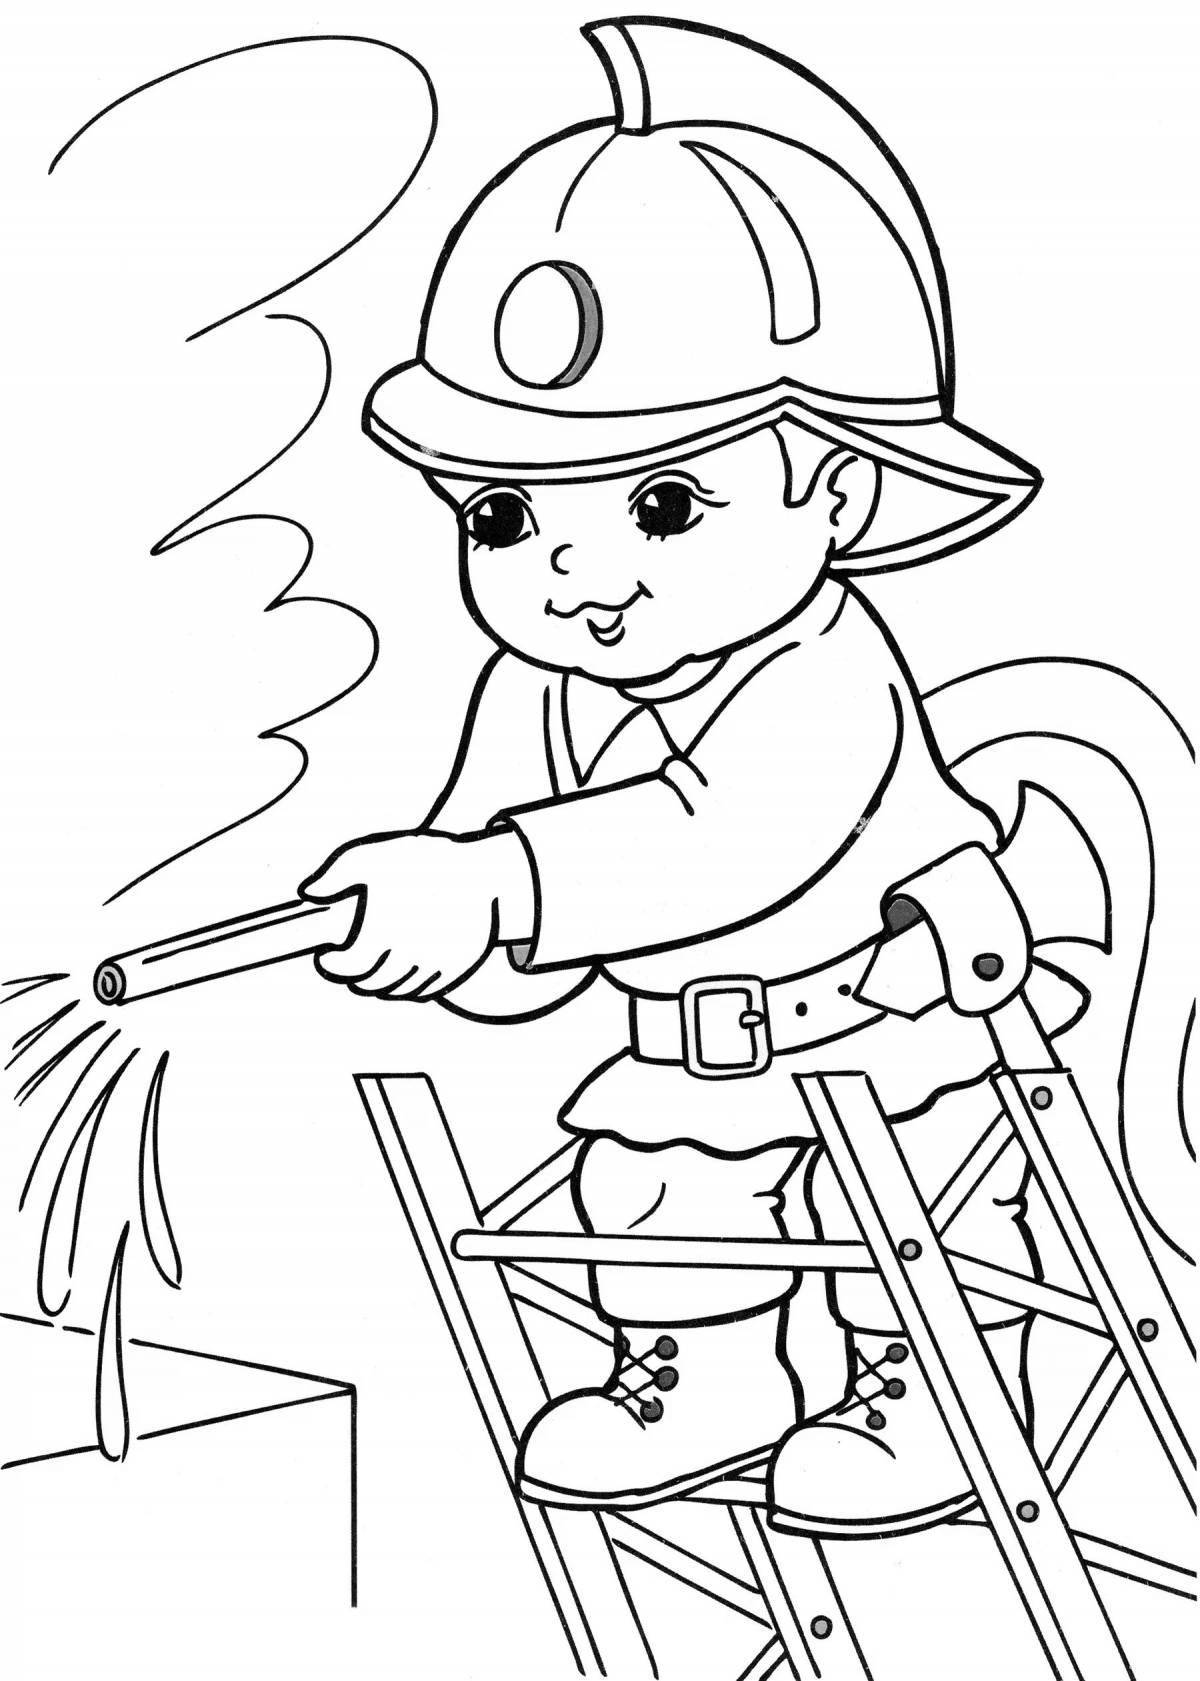 1st grade awesome job coloring pages